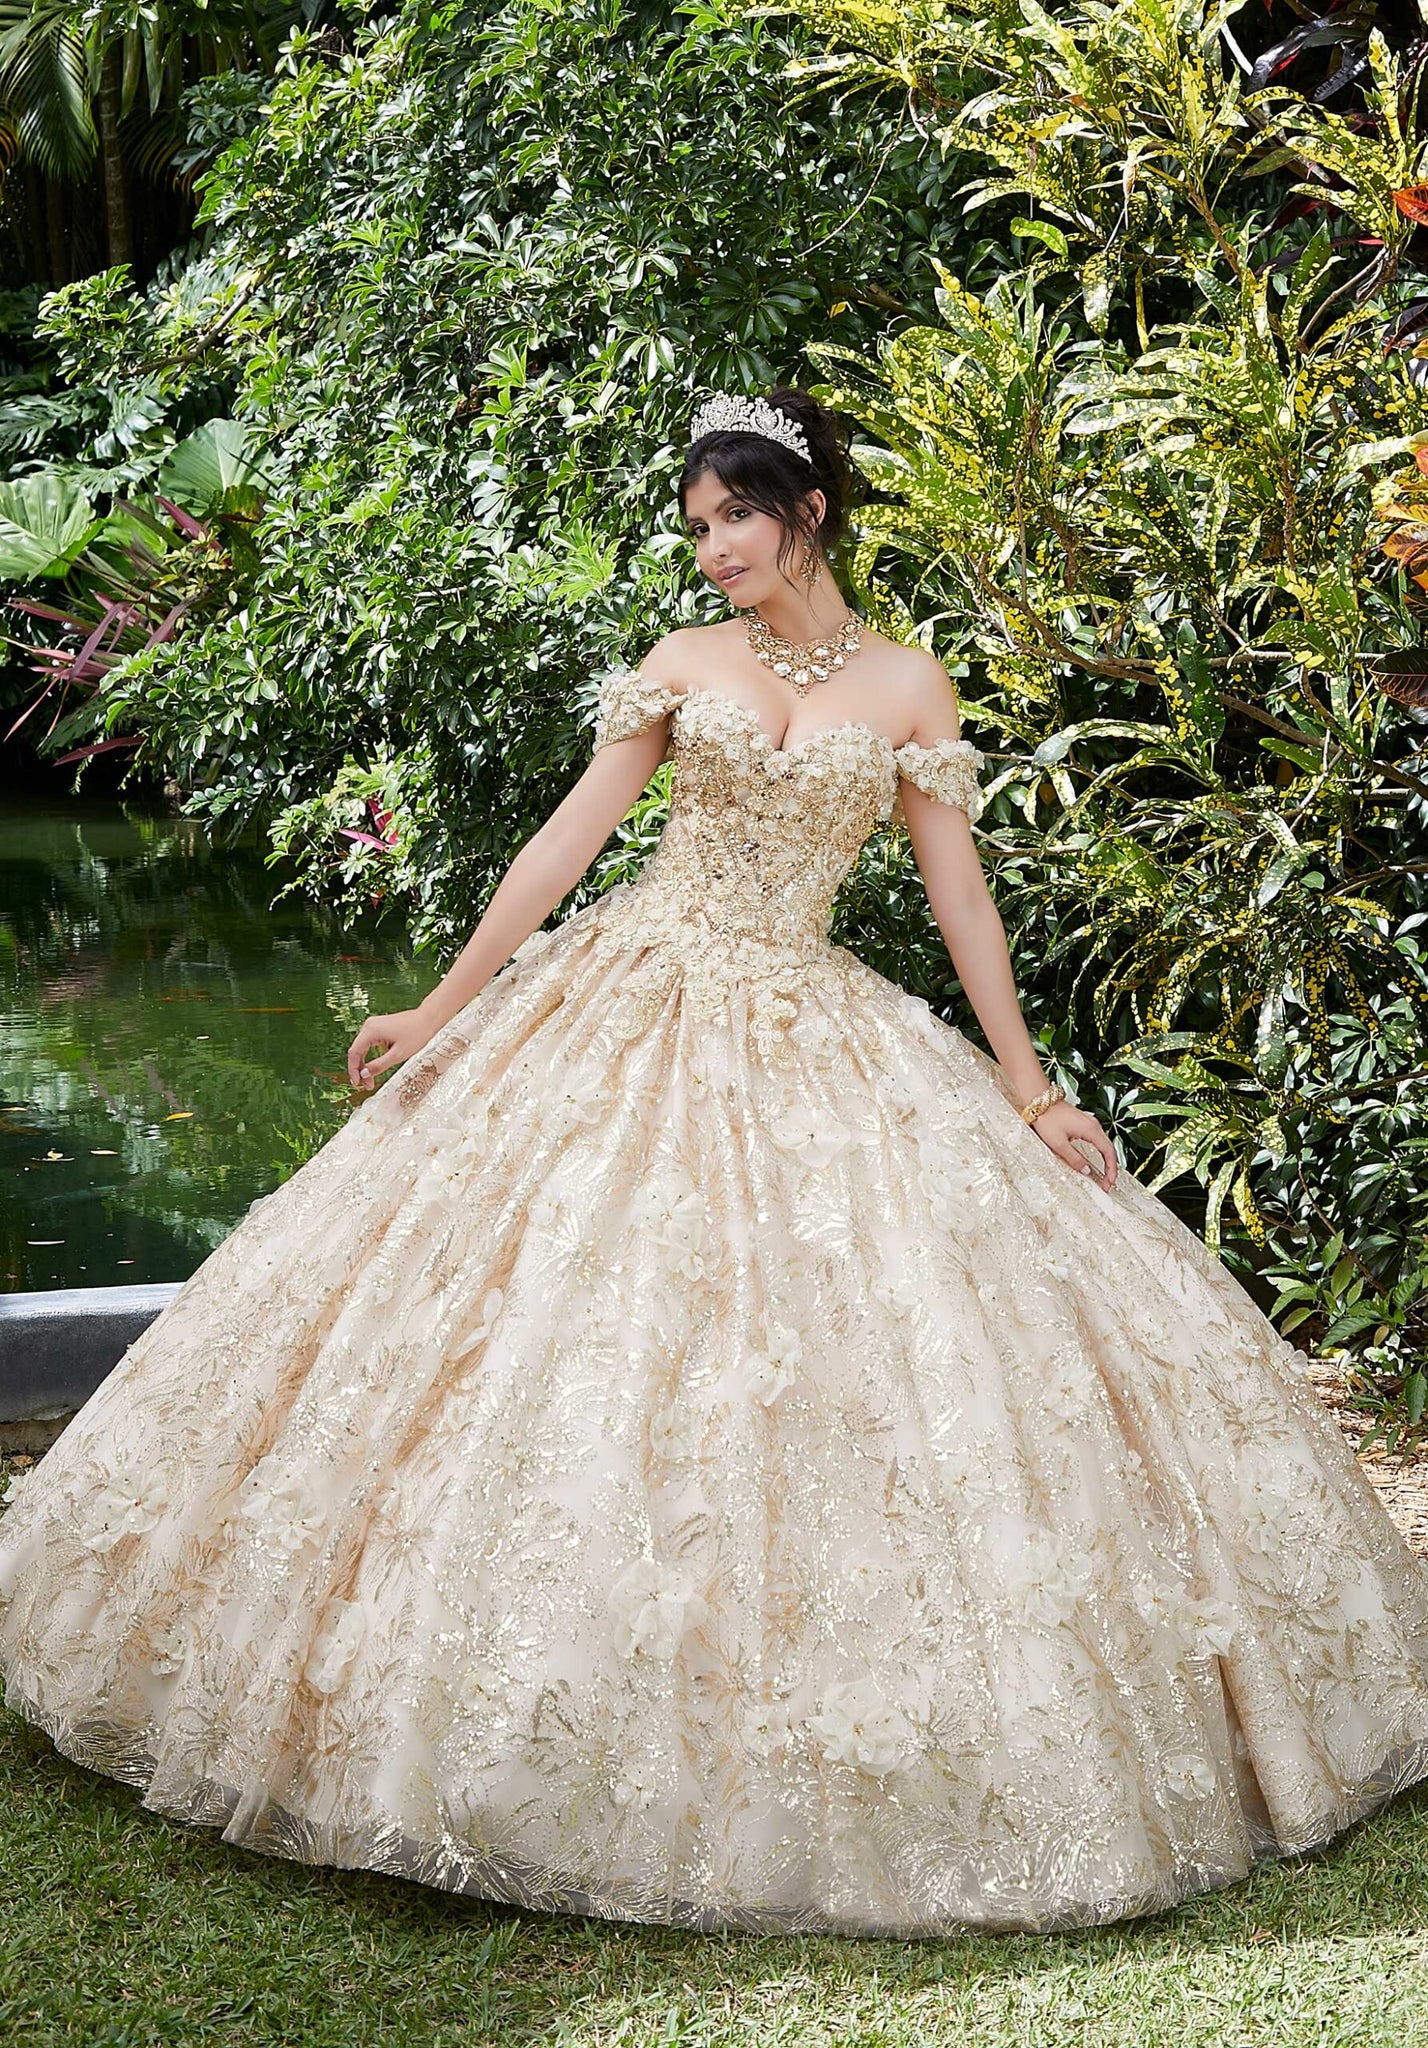 Floral and Sequin Patterned Quinceañera Dress